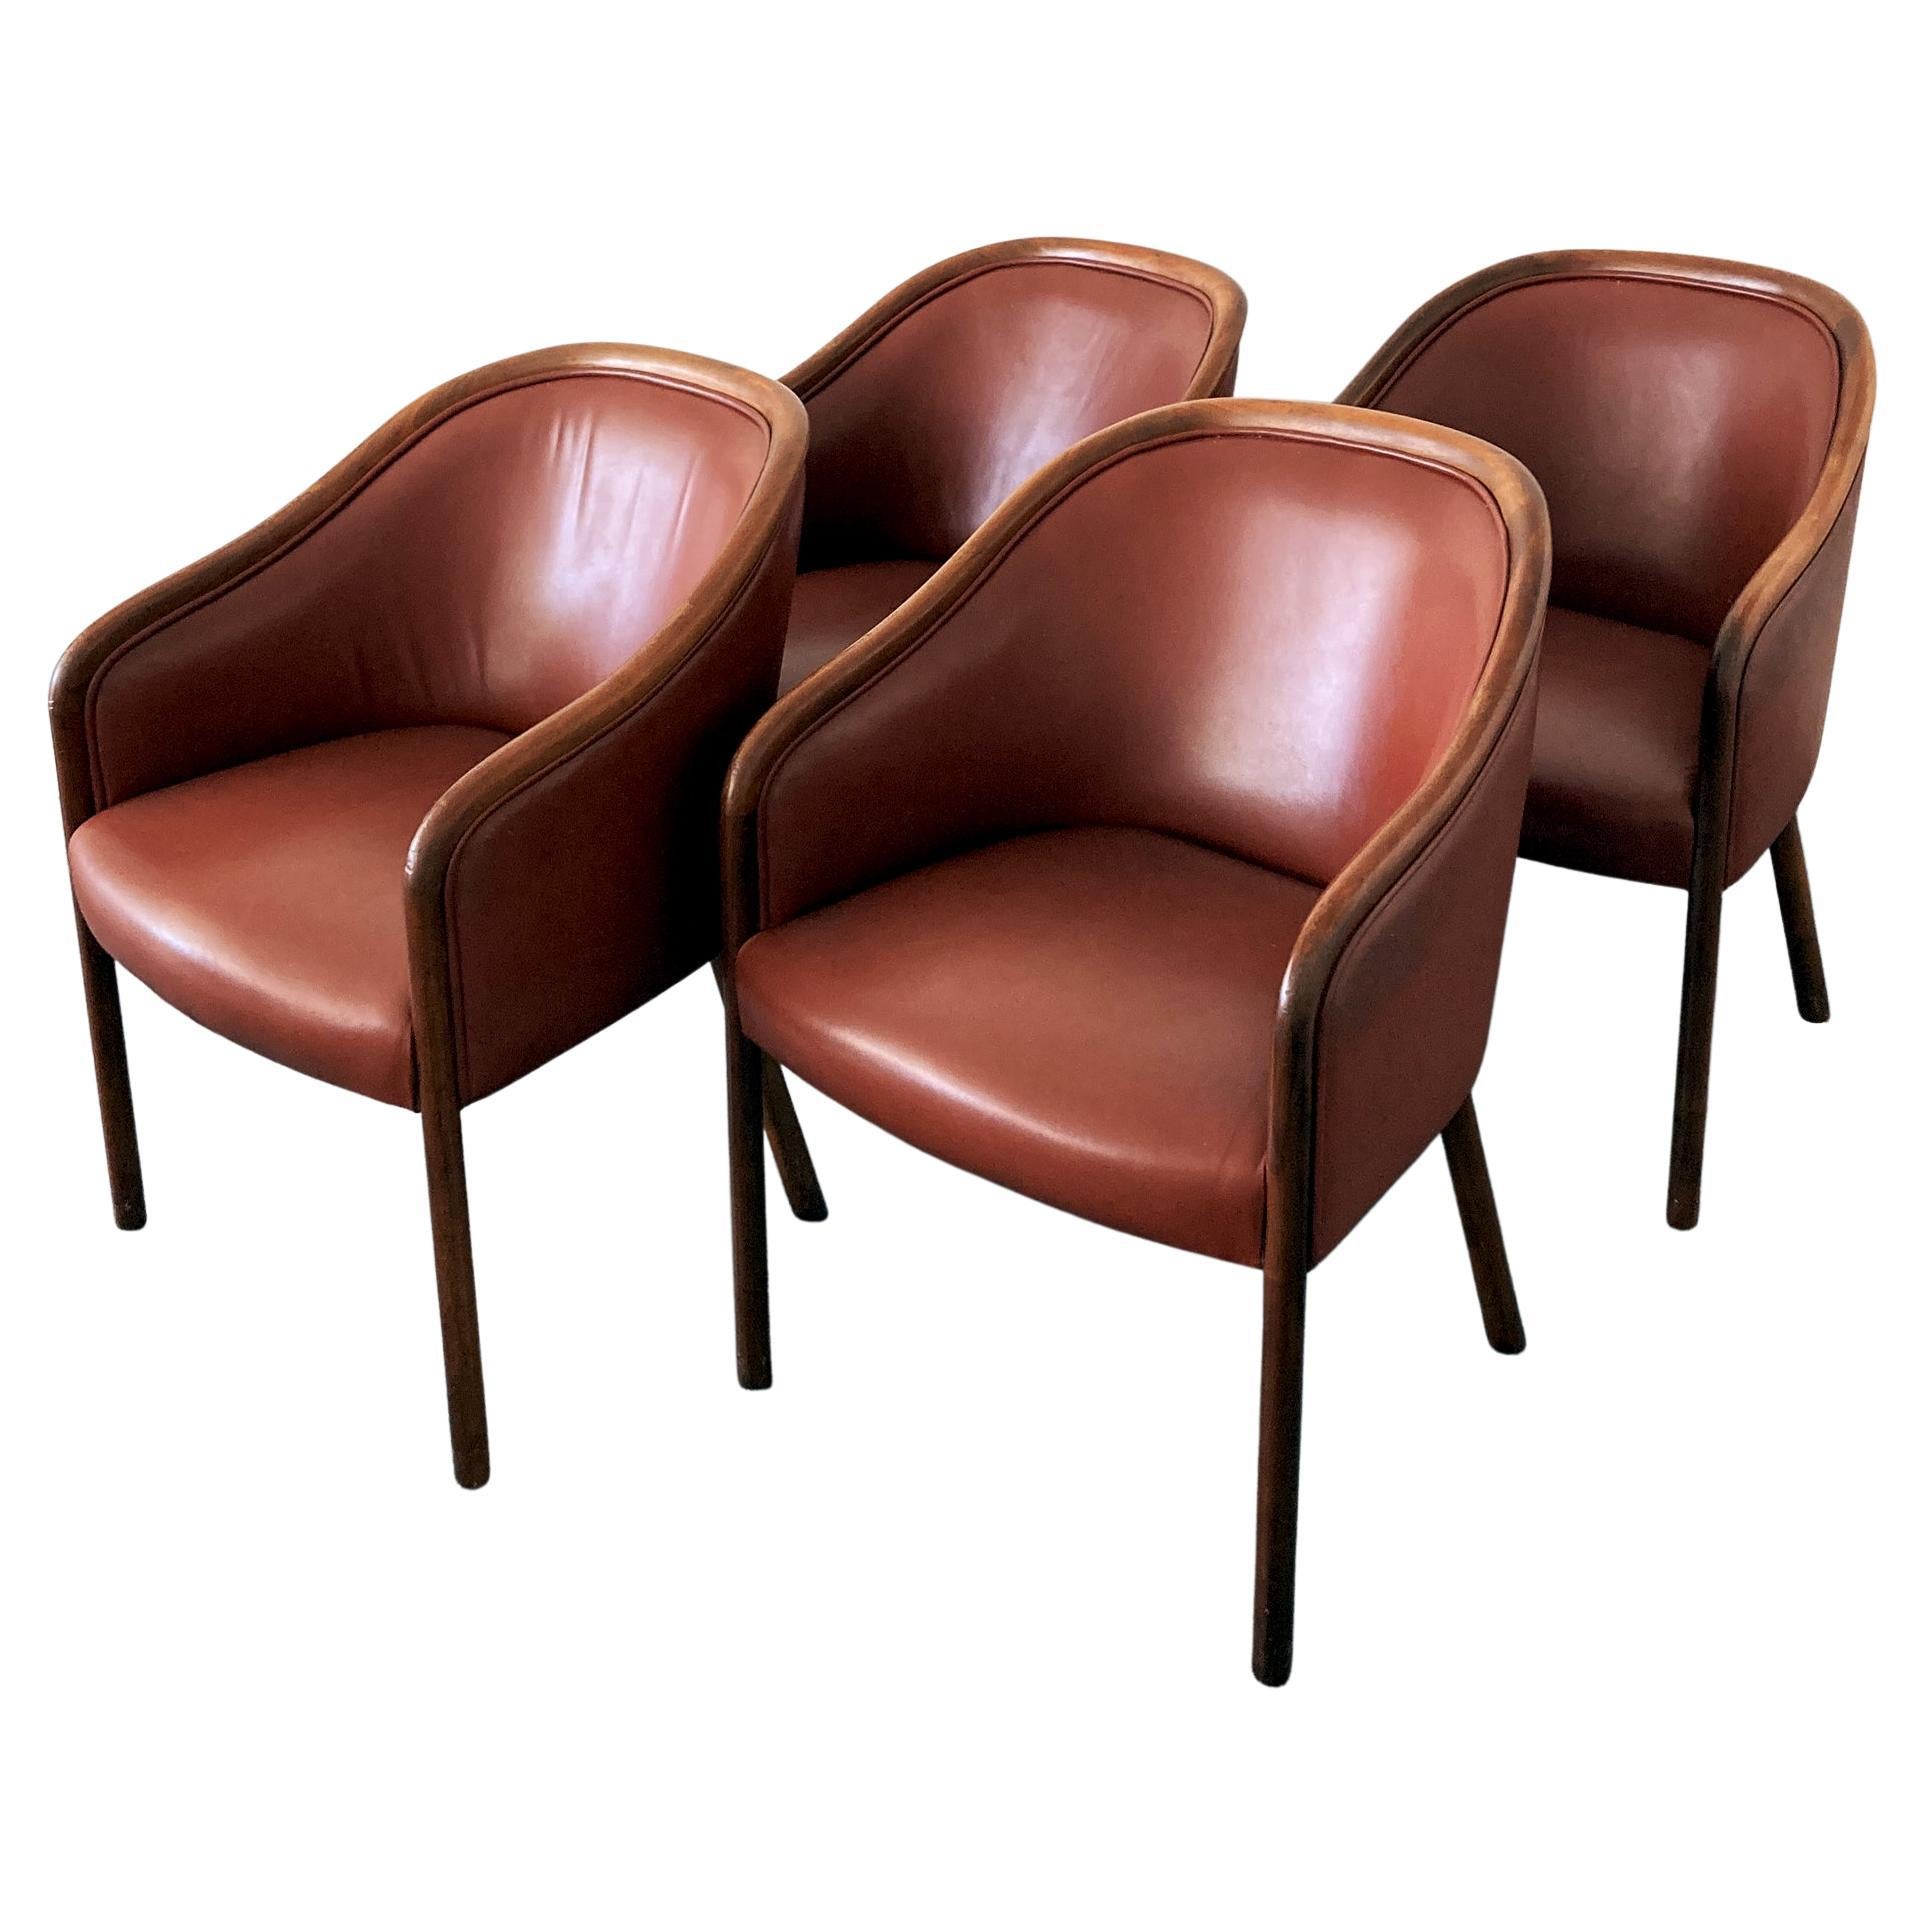 Designed by Ward Bennett for Brickel Associates, elegant leather armchairs. Made from ash wood and stained in a walnut finish, upholstered in leather. Stunning set of chairs, leather is in good condition. The chairs are structurally sound and